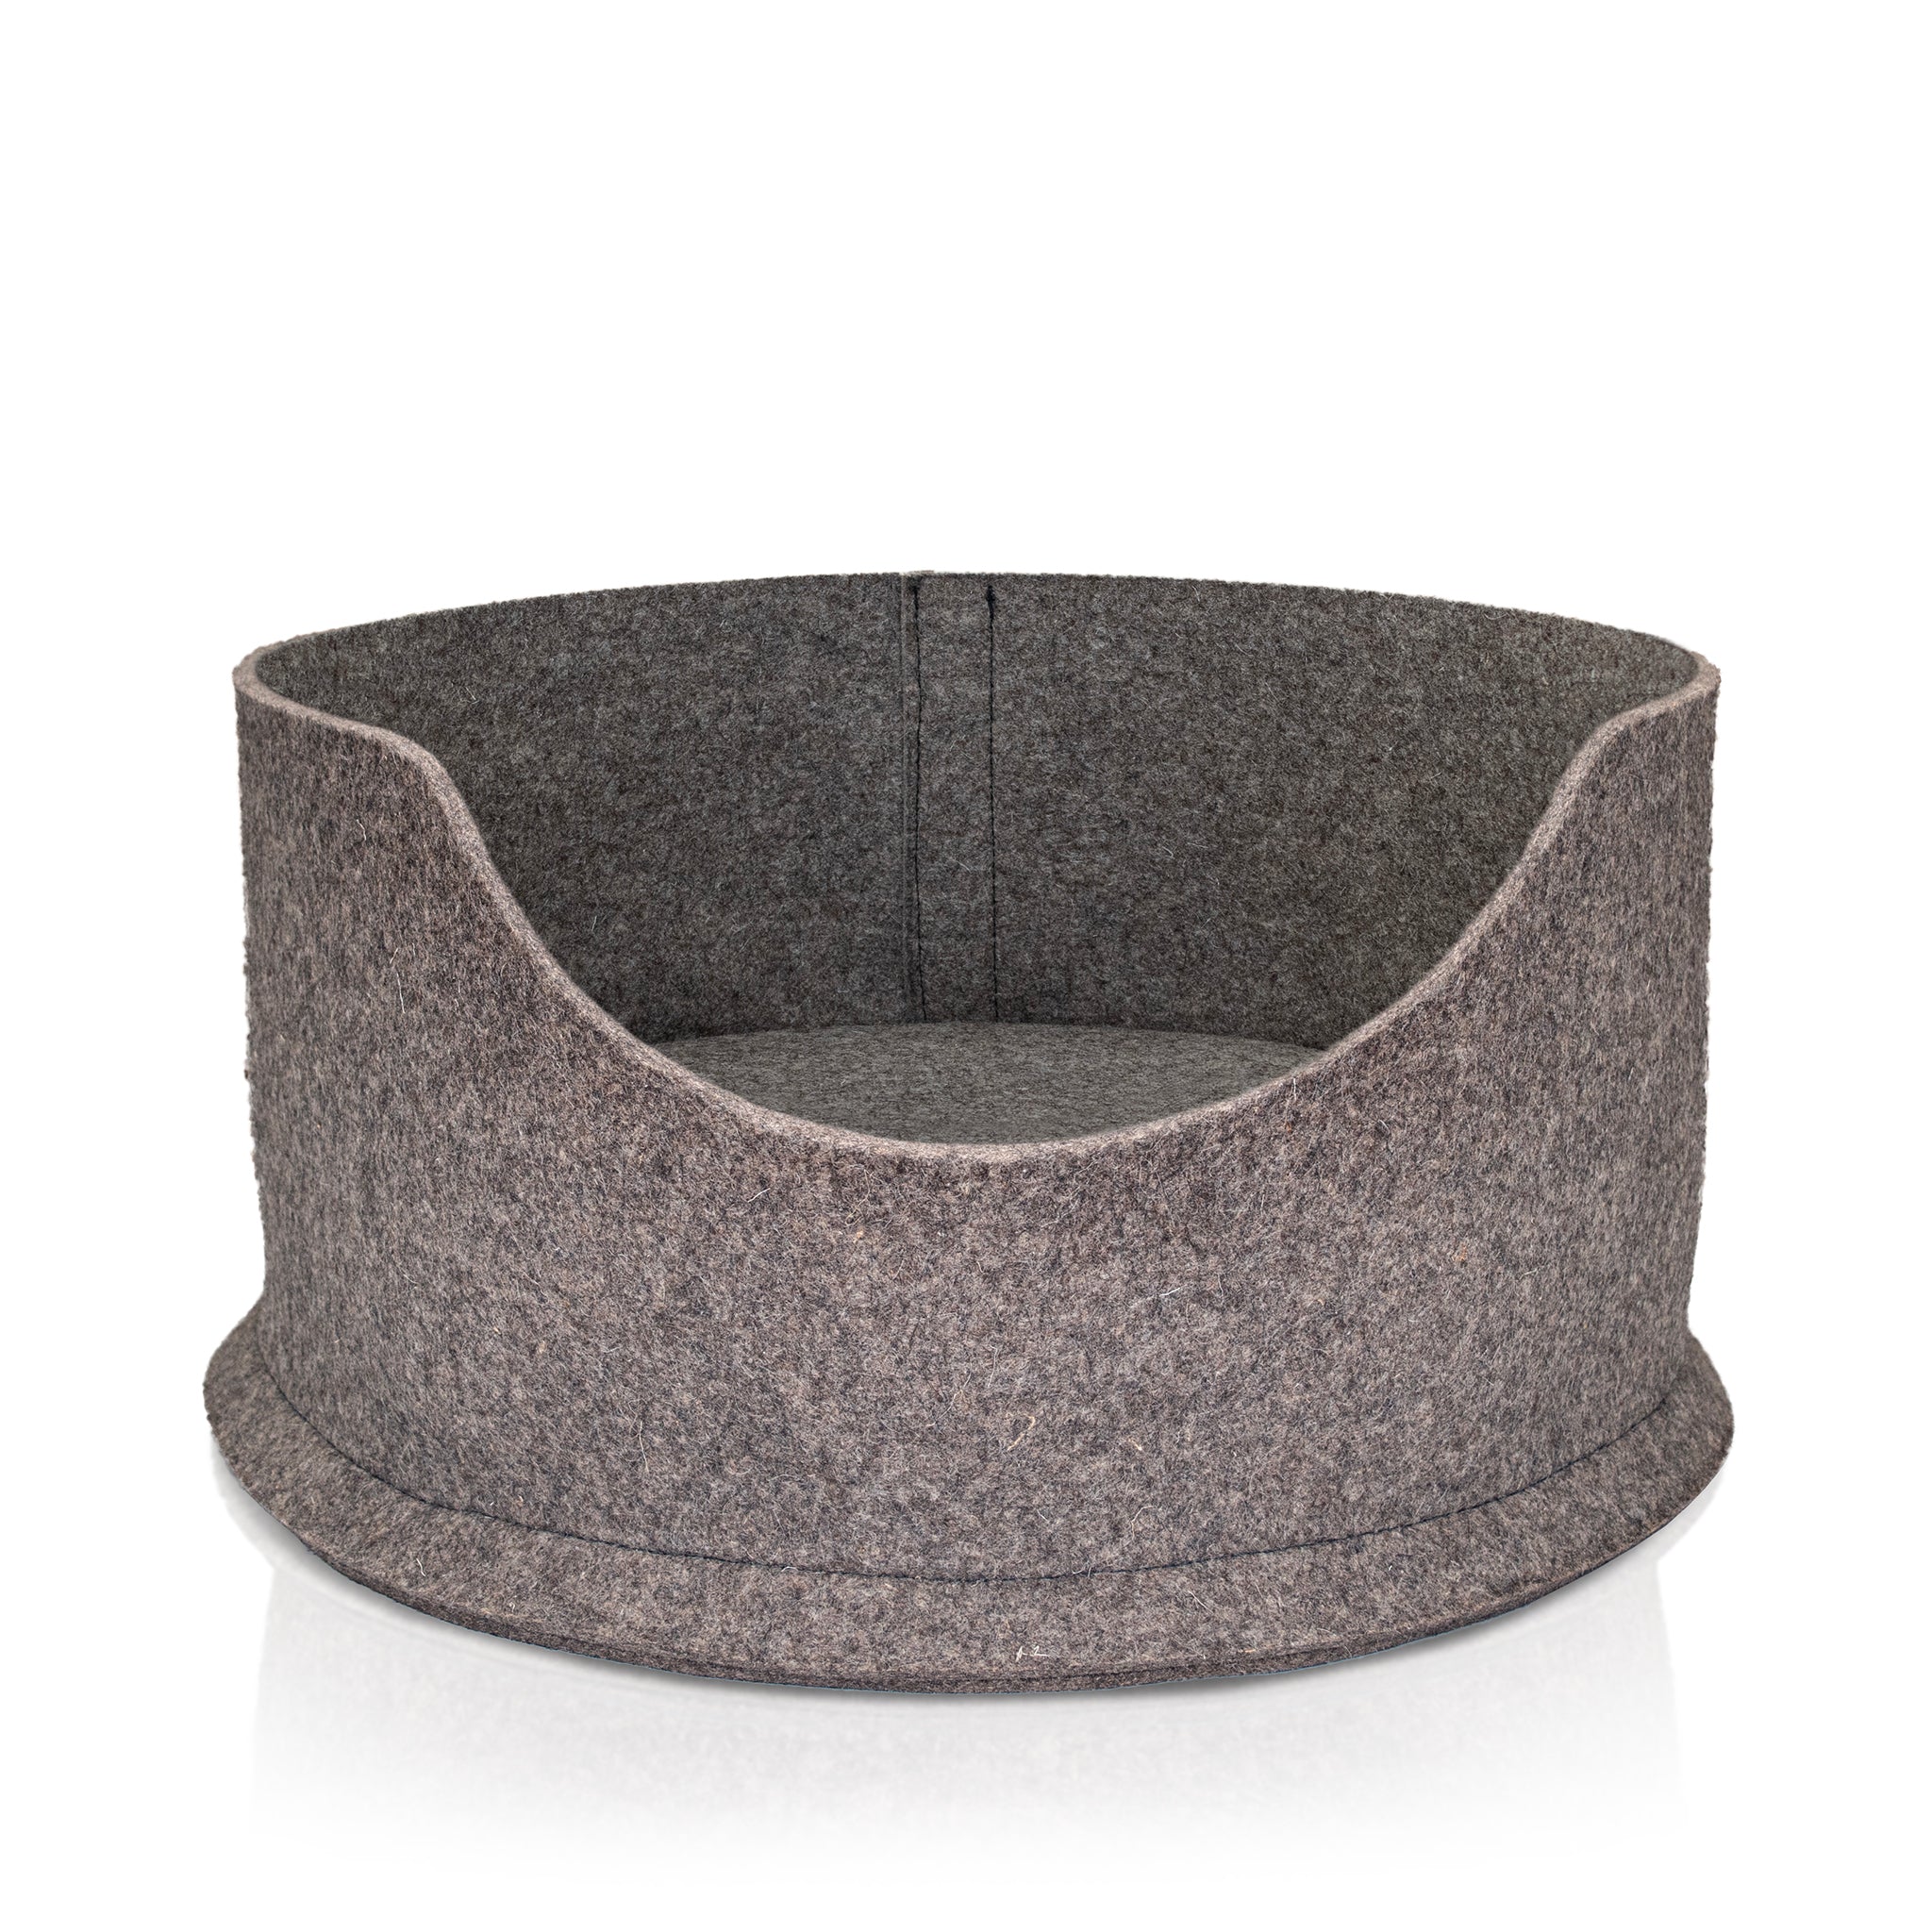 A Chimney Sheep Large PetSnug Cat Bed. Also known as a Chimney Sheep Large PetSnug dog bed. This is a wool felt snug bed, made of 100% natural sheep's wool. It is plastic free and pet safe. The pet sis upon a white background. It is 3D circular in shape with a dip in the centre to allow easy access for pets.